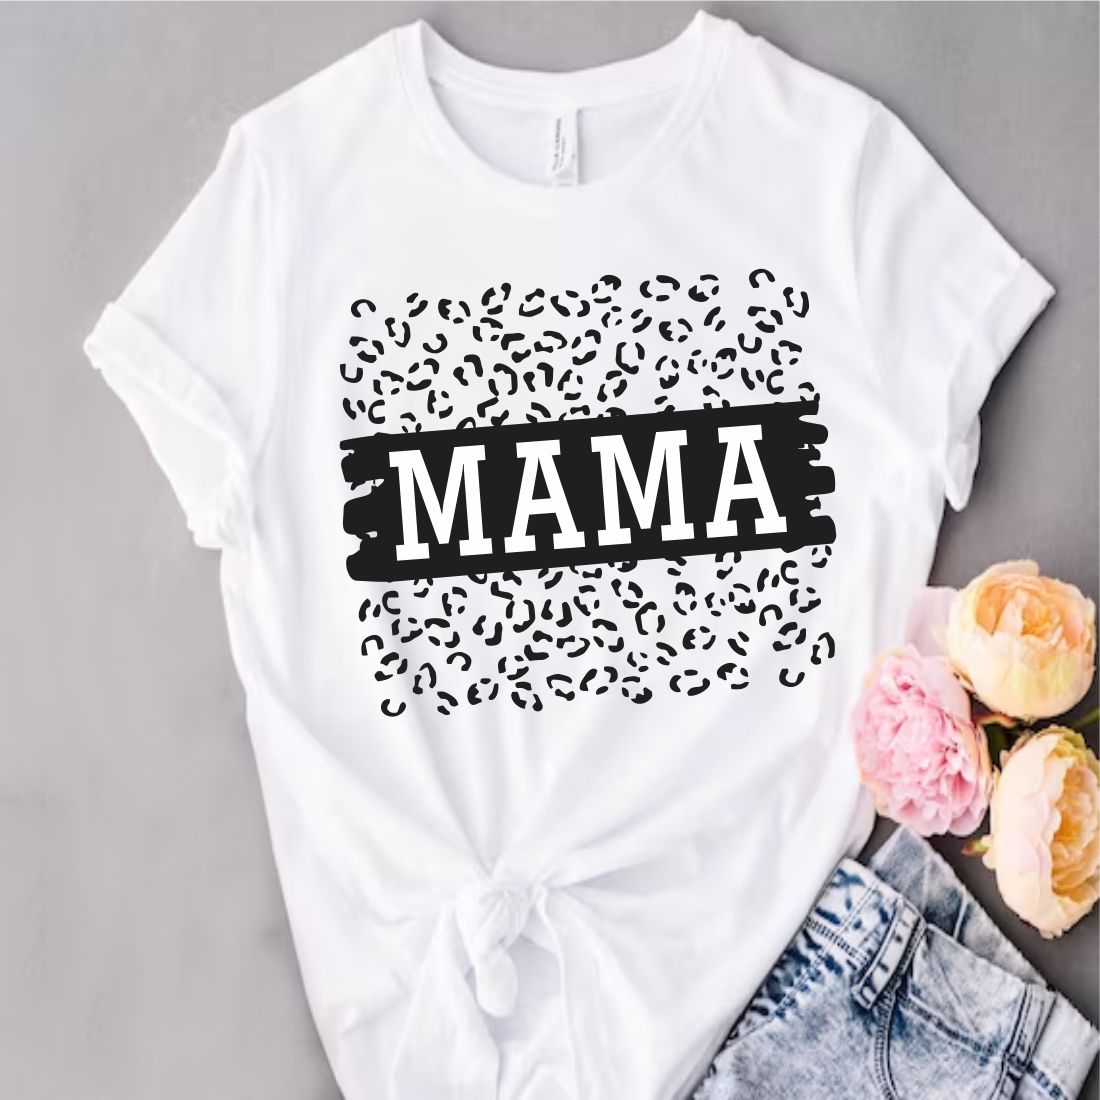 T - shirt with the word mama printed on it.